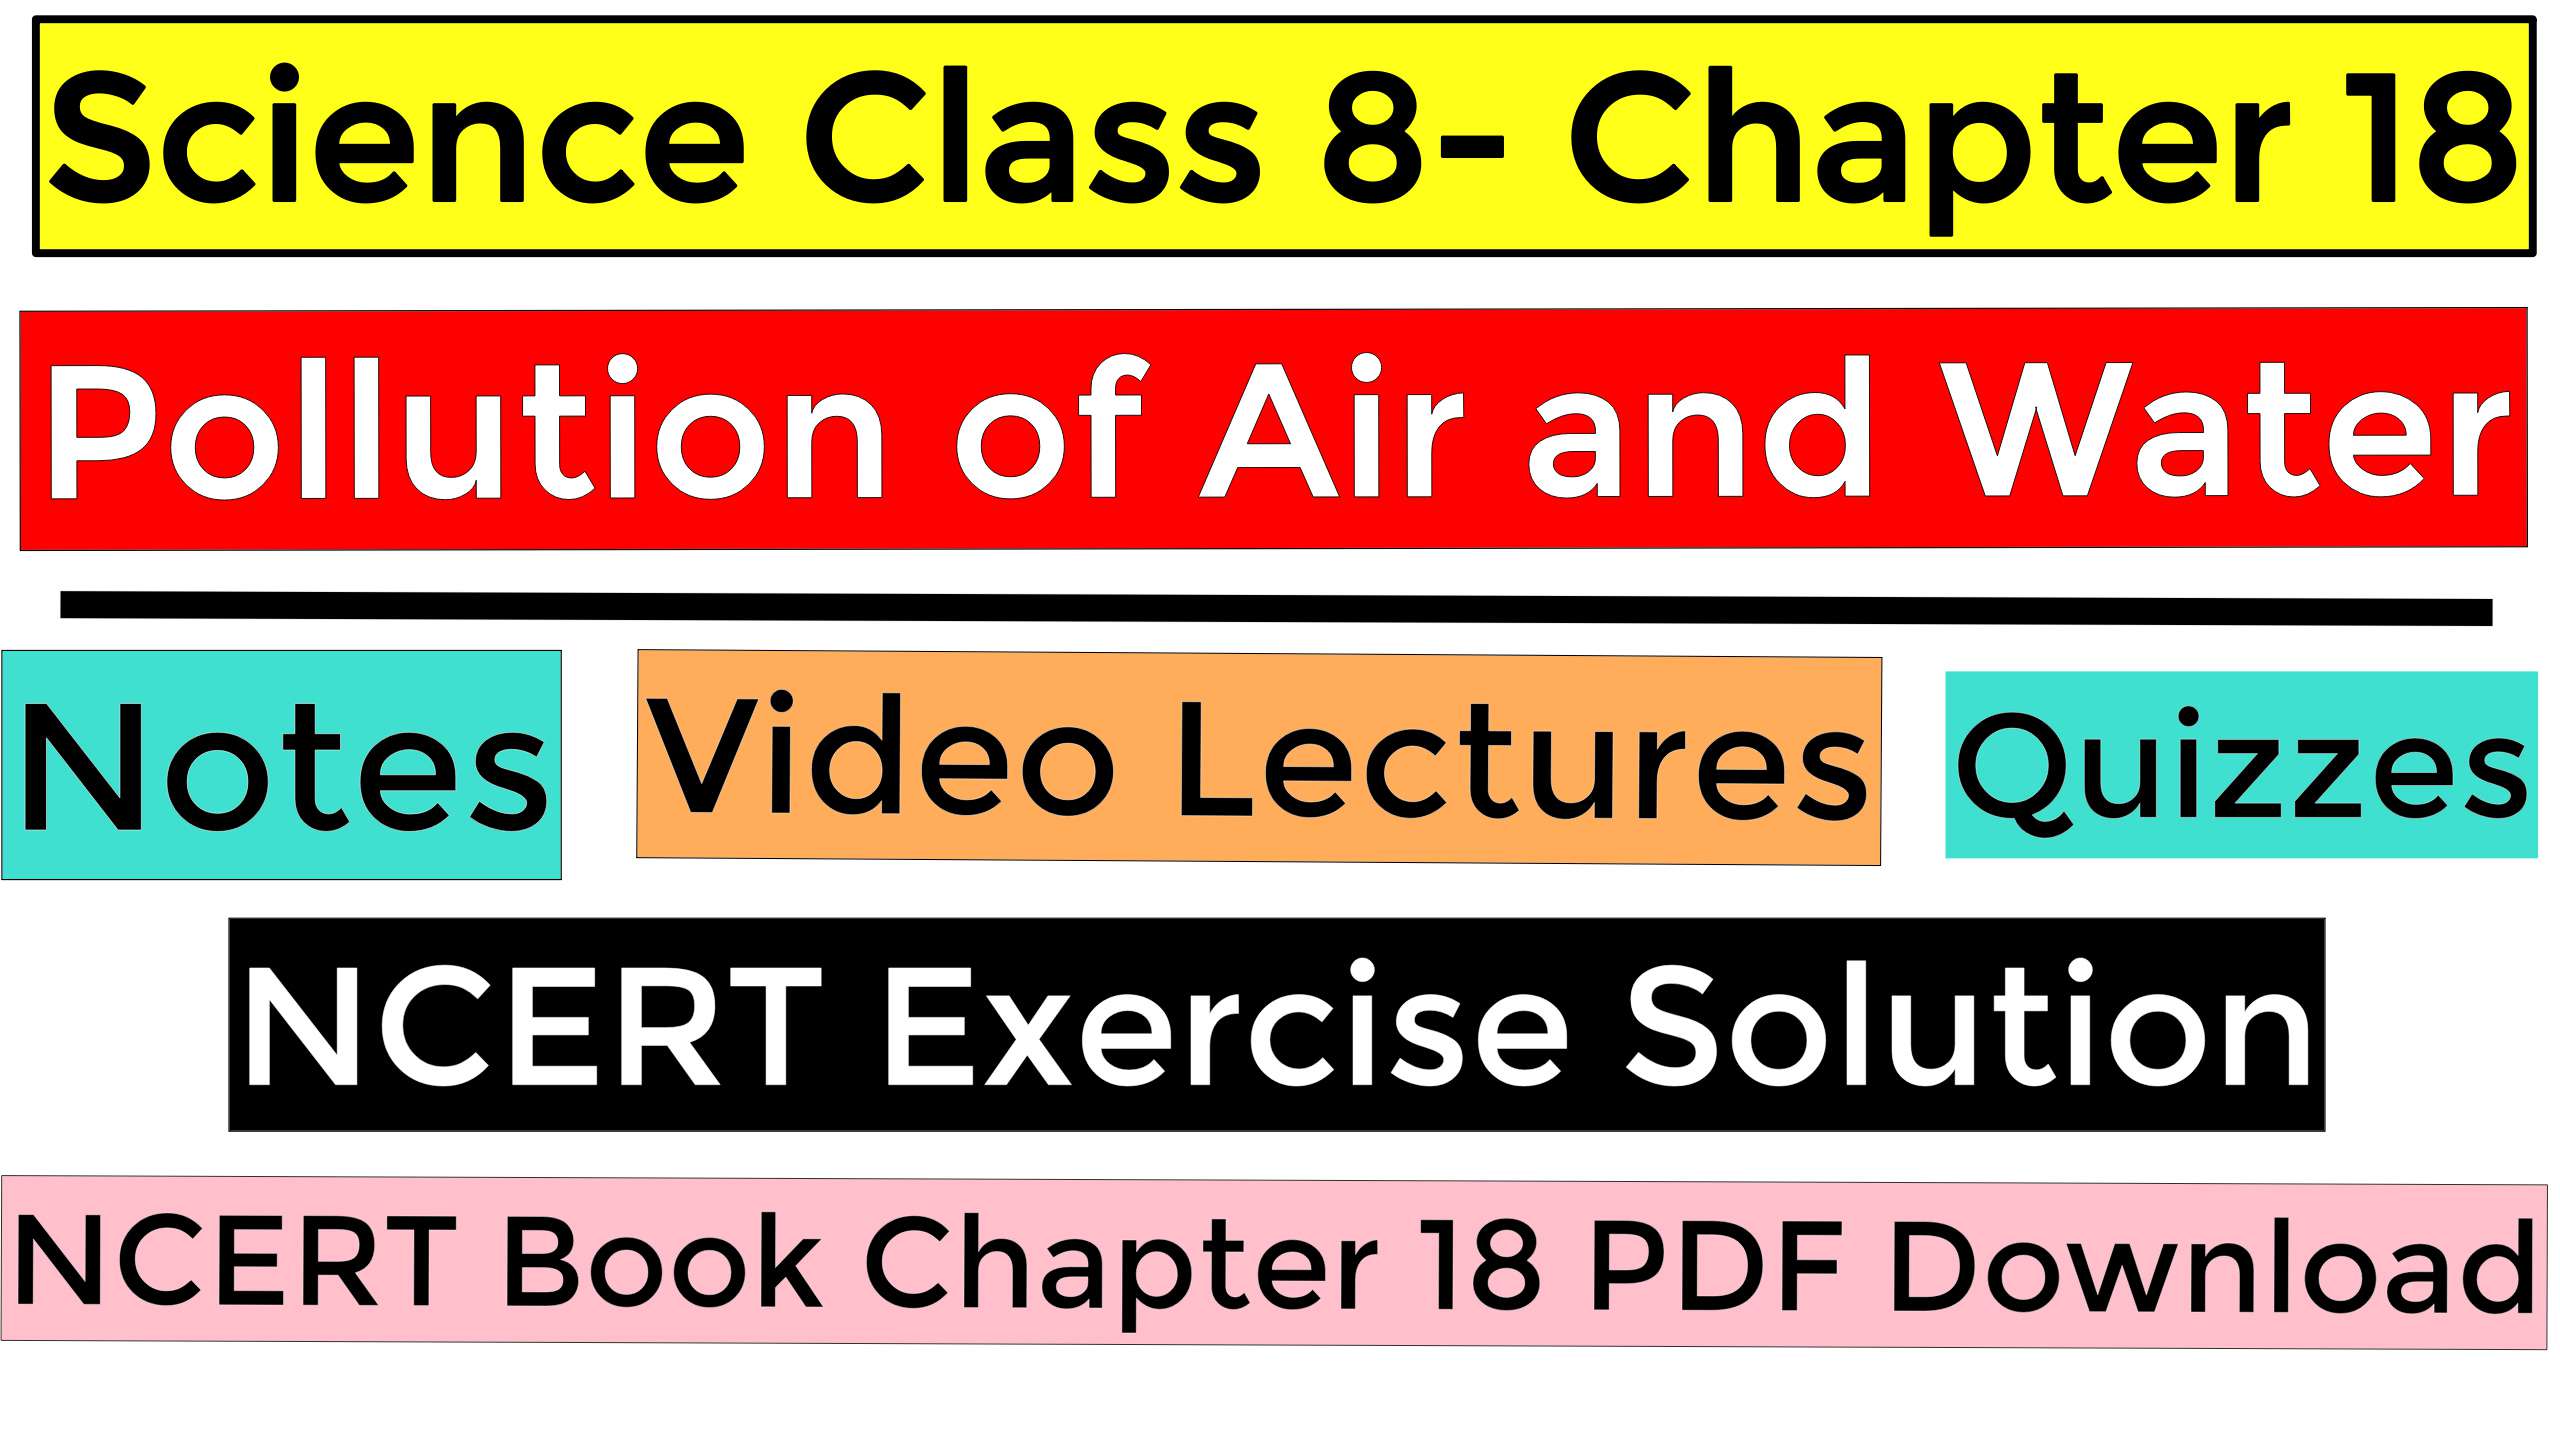 Science Class 8- Chapter 18- Pollution of Air and Water - Notes, Video Lectures, NCERT Exercise Solution, Quizzes, NCERT Book Chapter 18 PDF Download